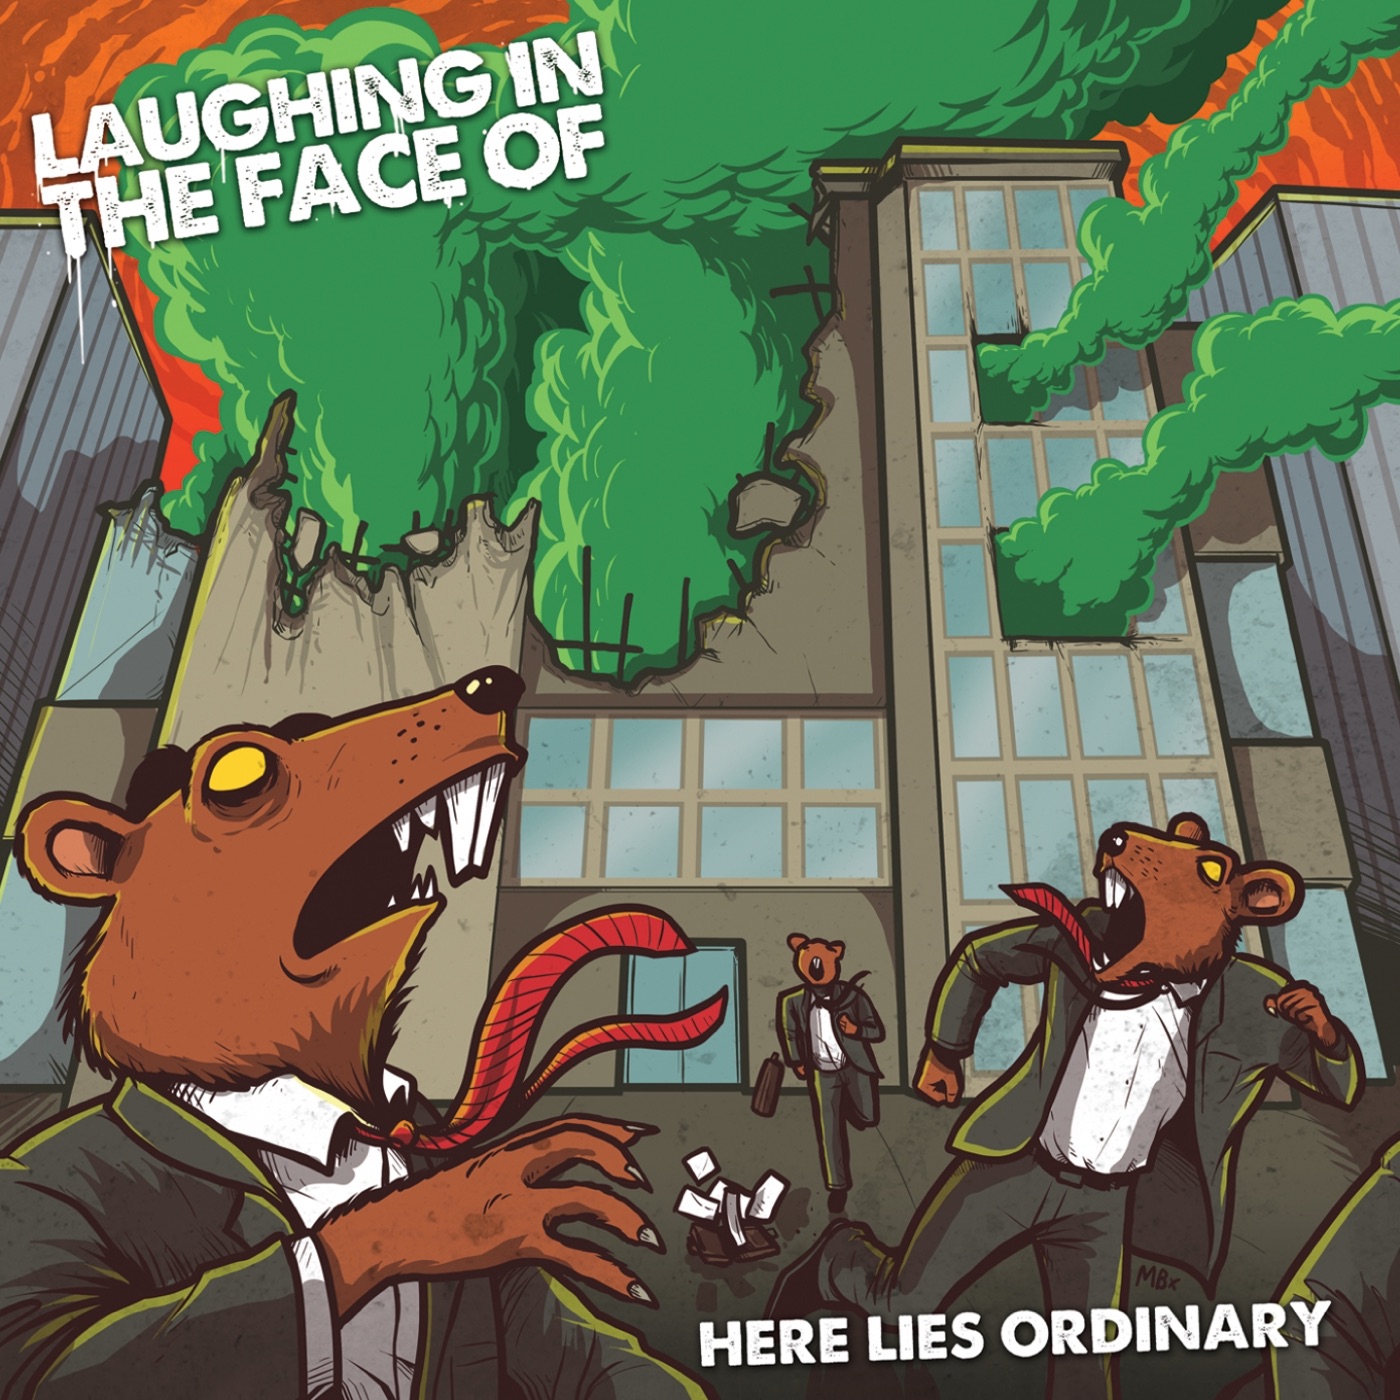 Laughing In The Face Of - Here Lies Ordinary (2020)